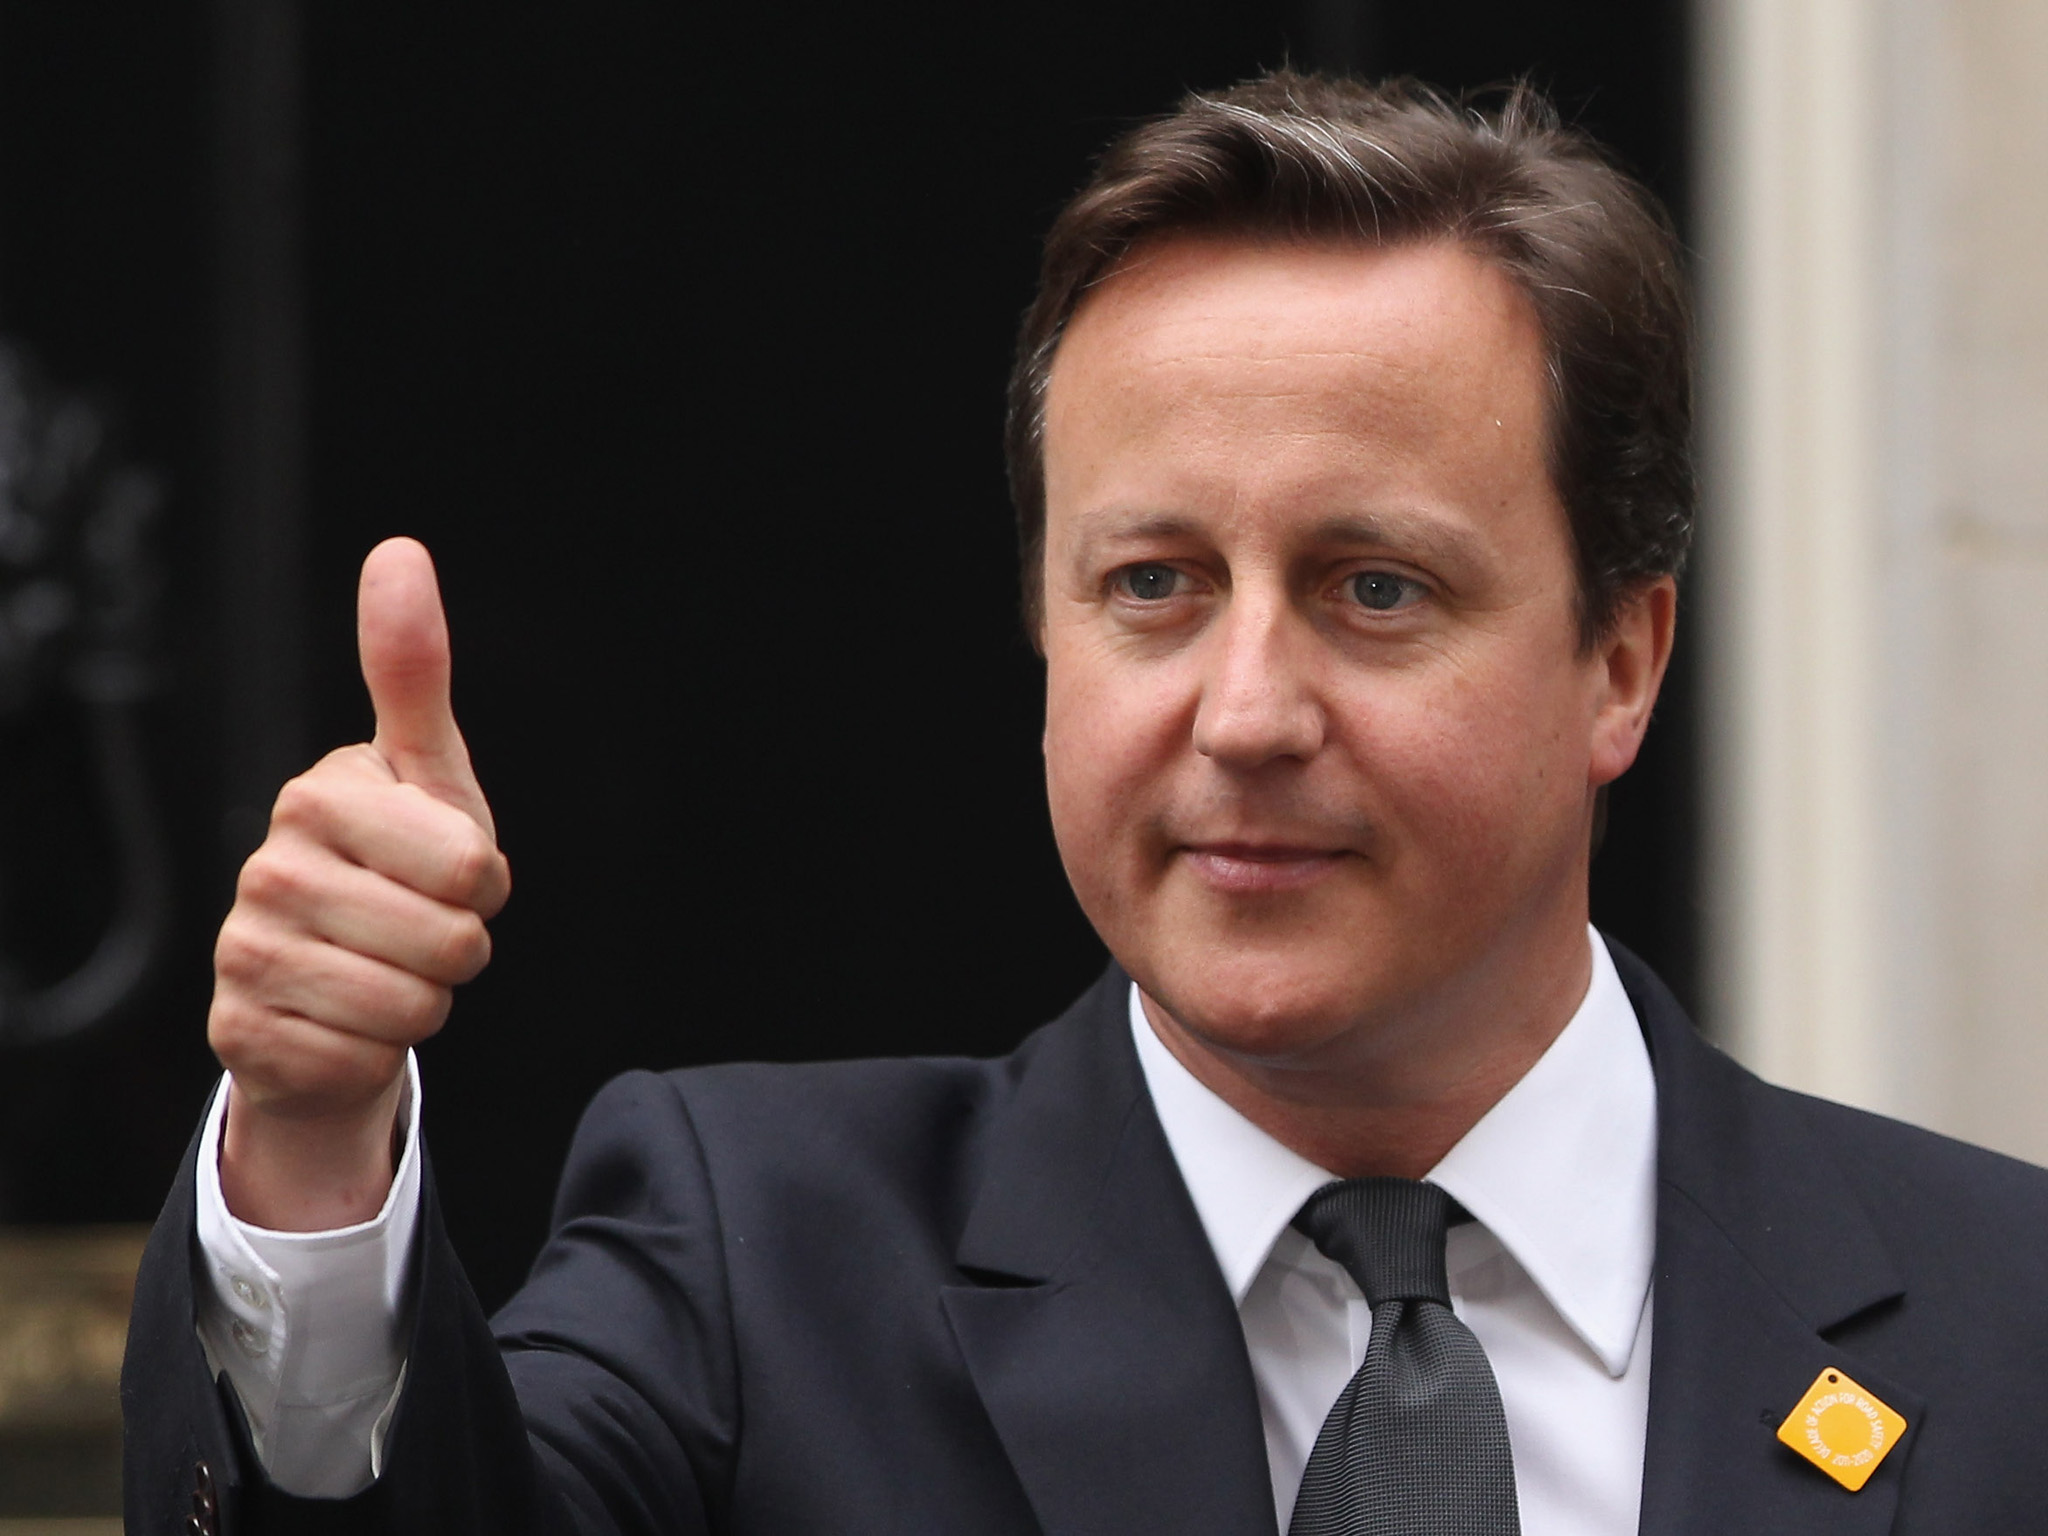 David Cameron to resign Wednesday, paving way for second female Prime Minister